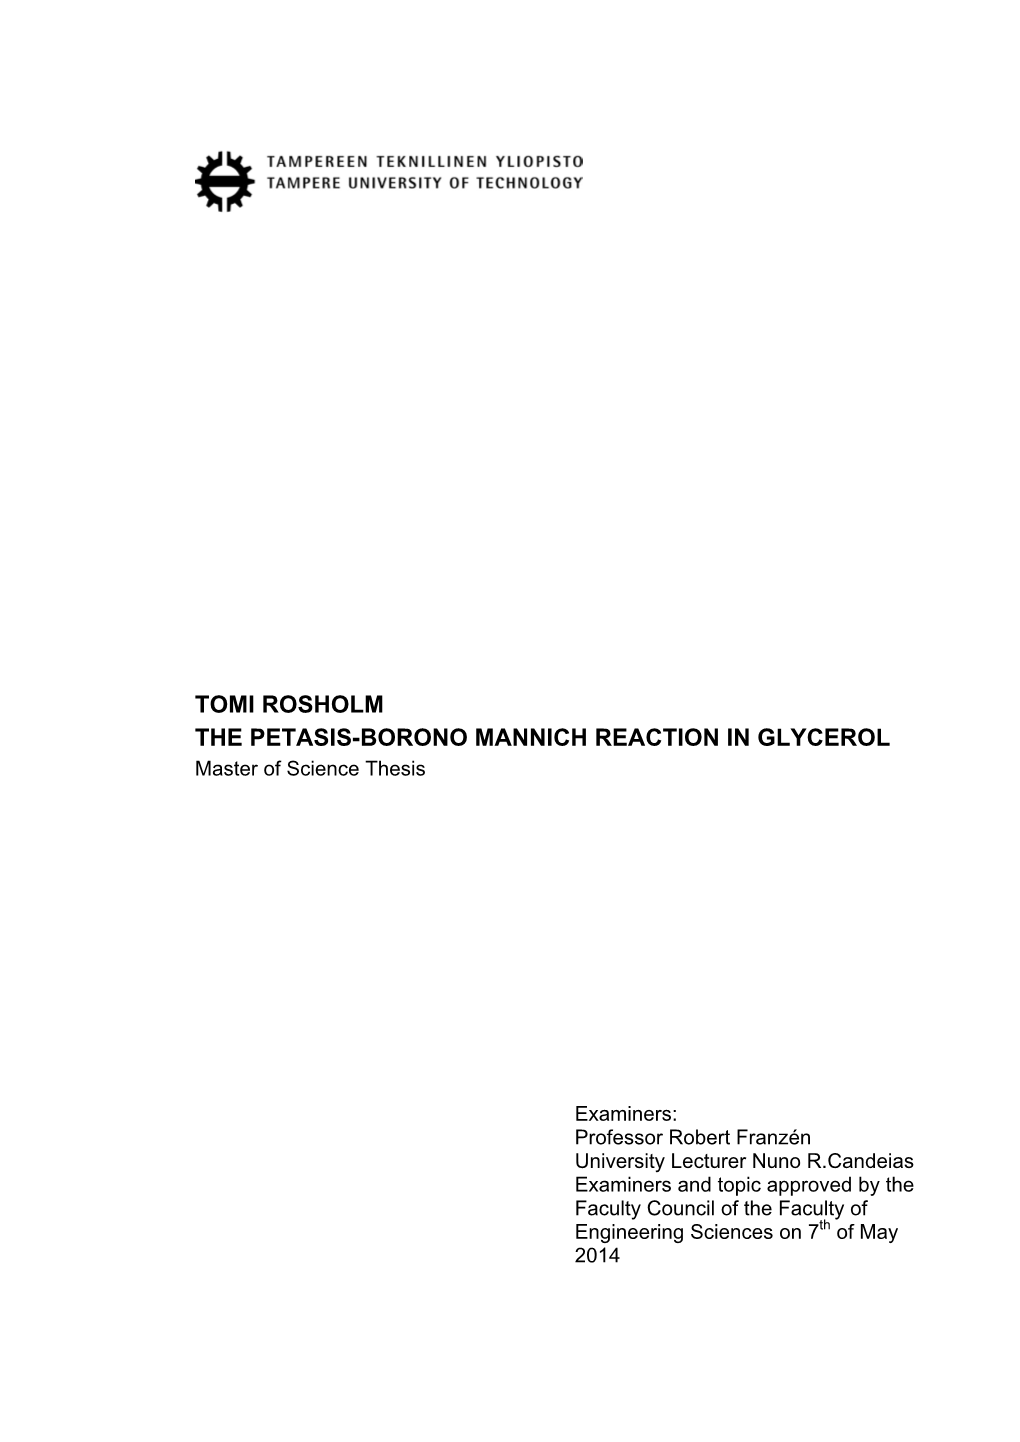 TOMI ROSHOLM the PETASIS-BORONO MANNICH REACTION in GLYCEROL Master of Science Thesis